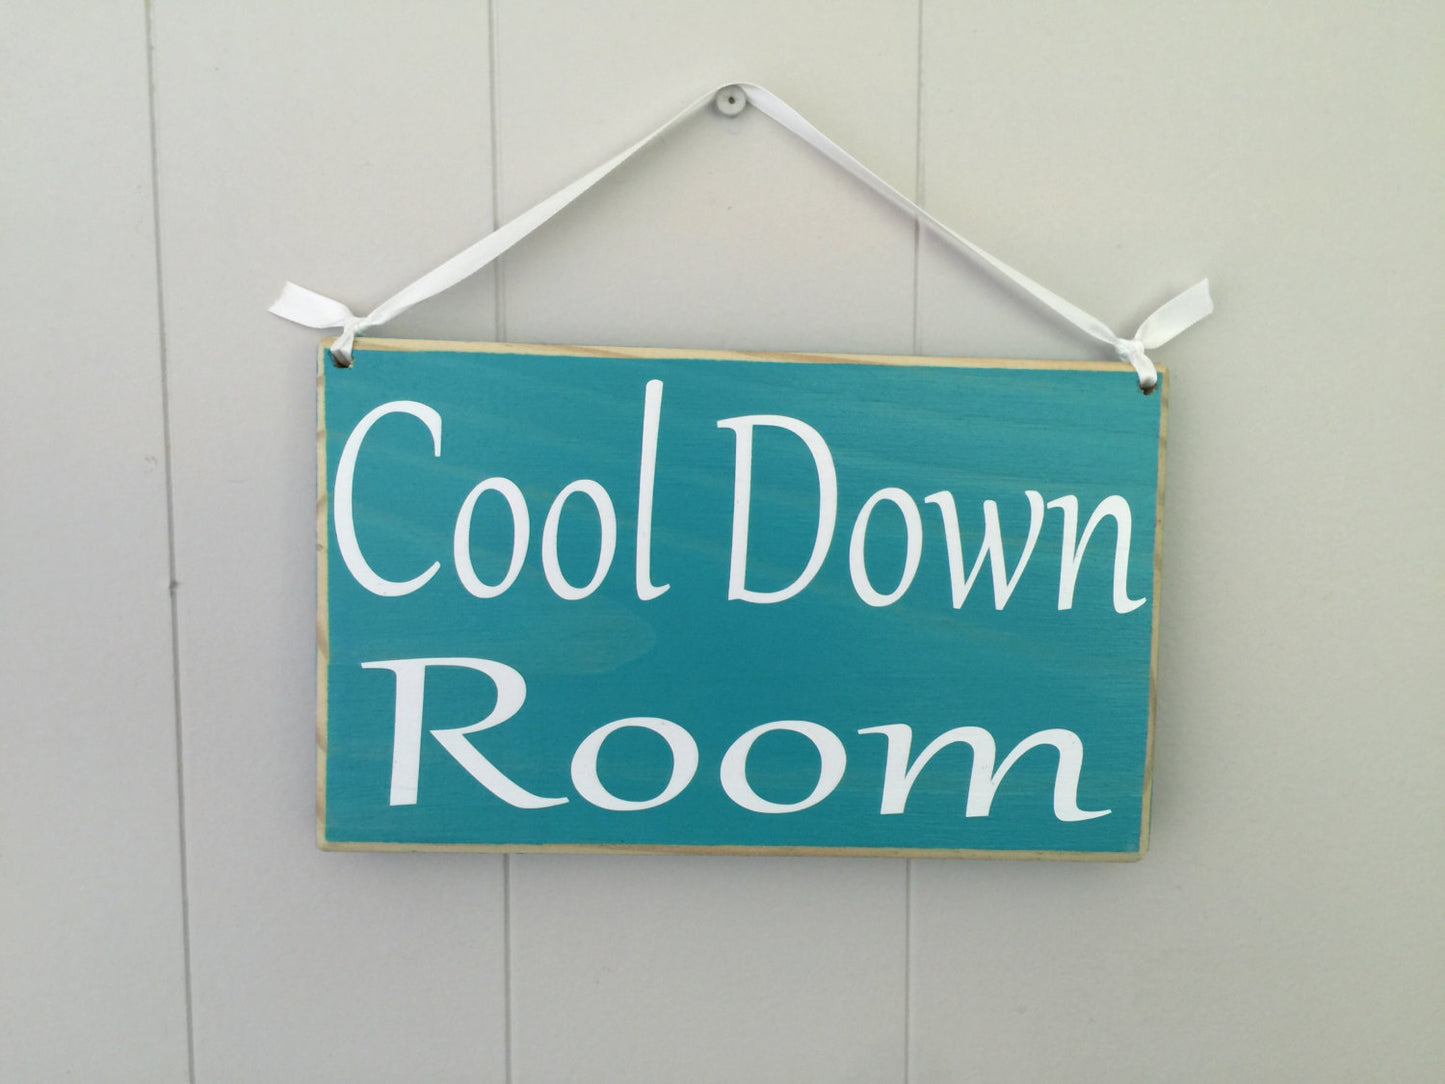 8x6 Cool Down Room Wood Spa Service Sign